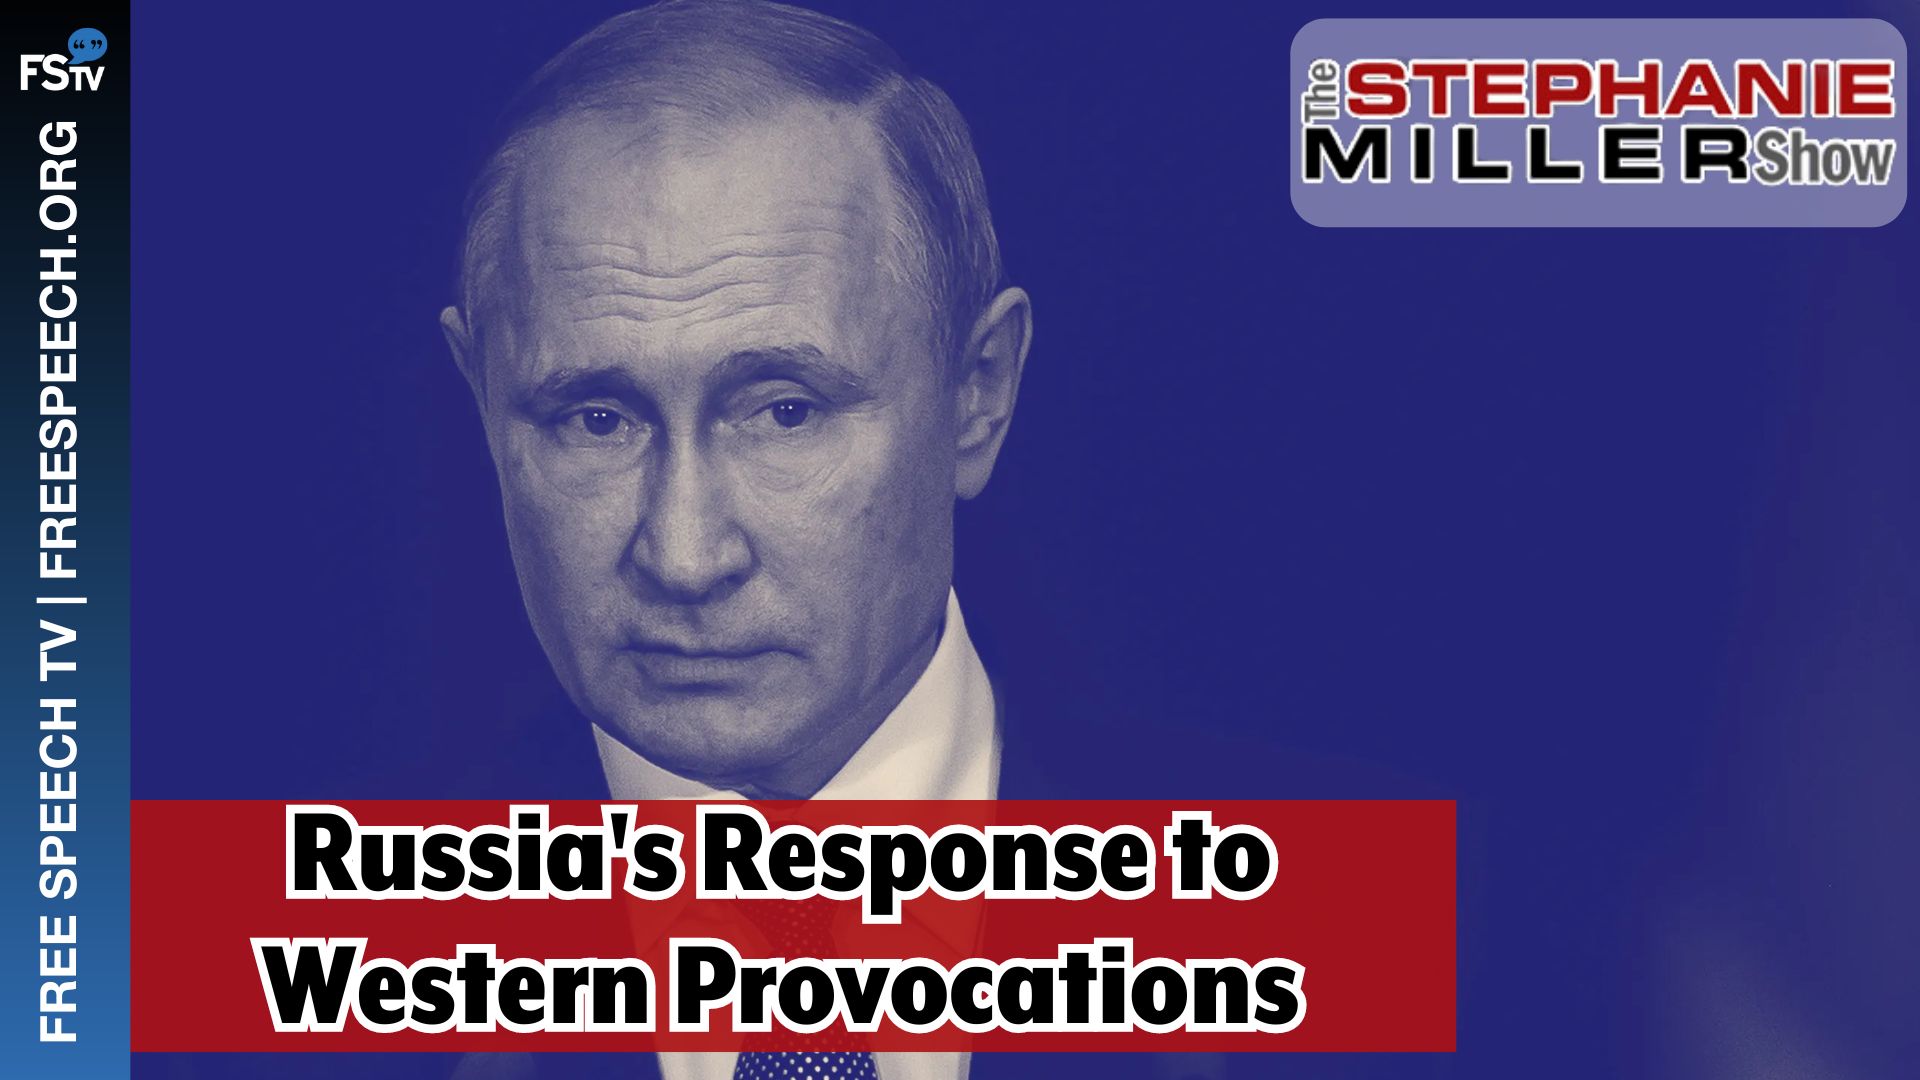 The Stephanie Miller Show | Russia's Response to Western Provocations